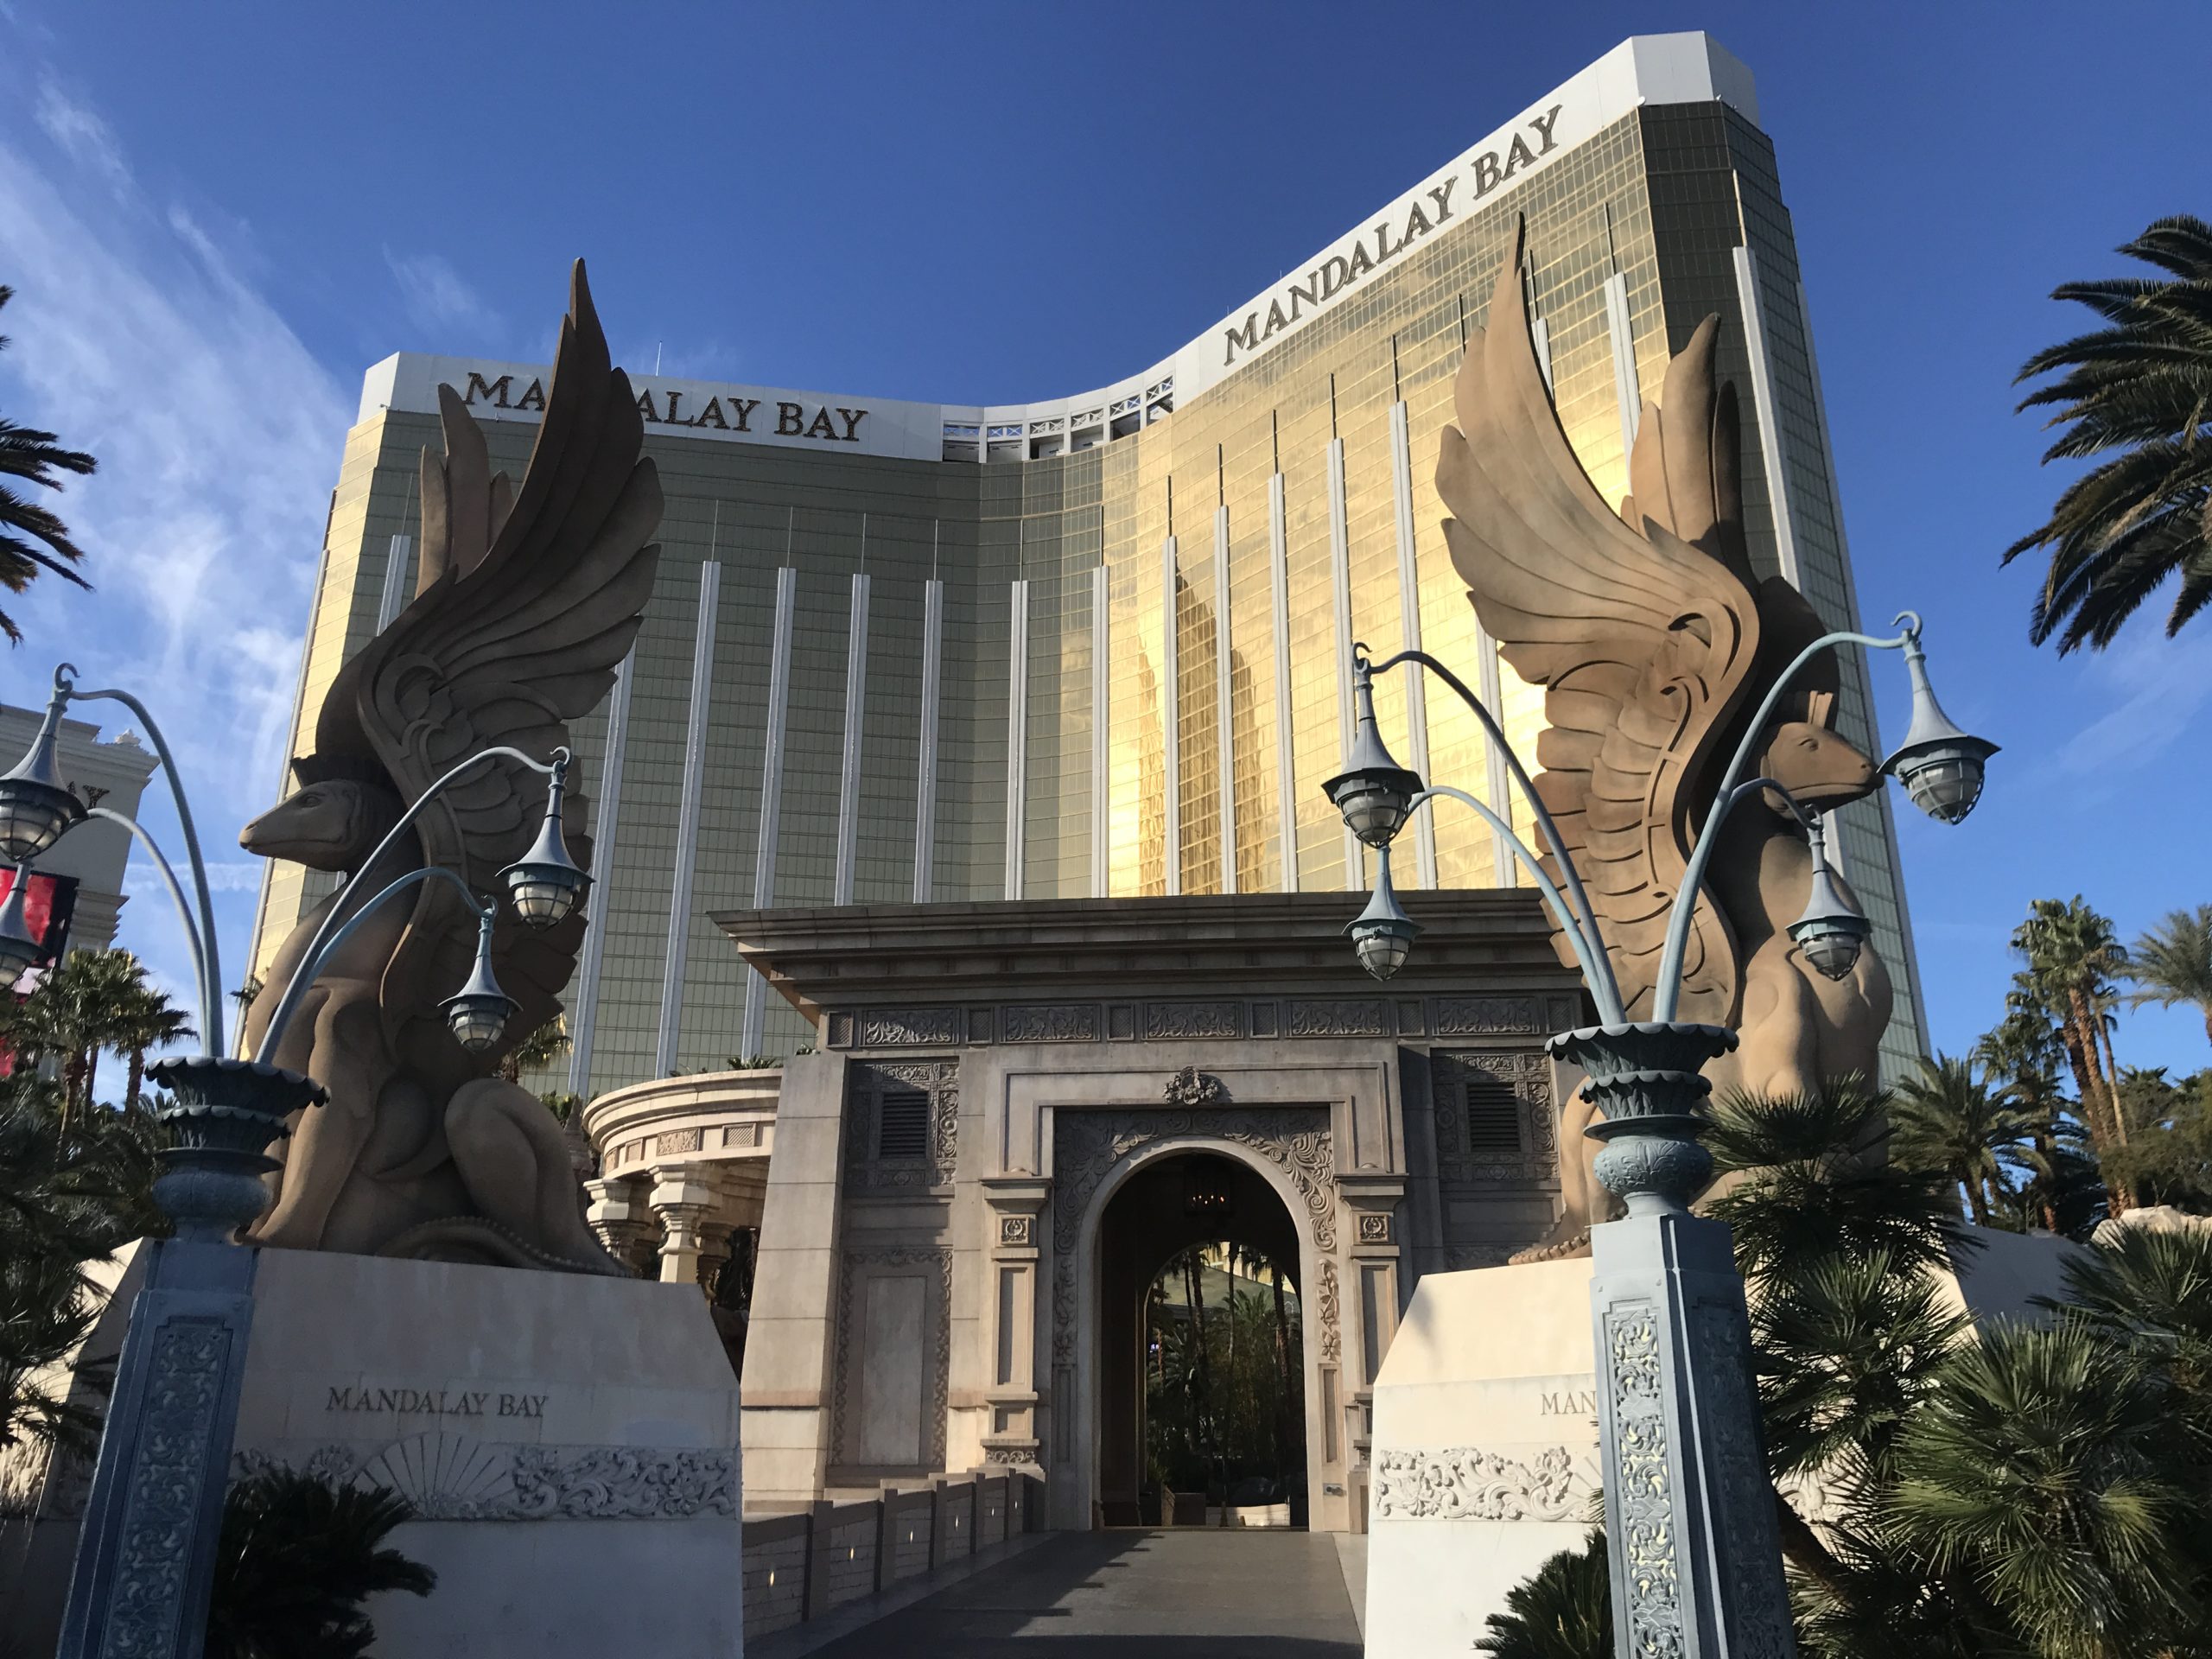 Mandalay Bay Resort And Casino is one of the best places to stay